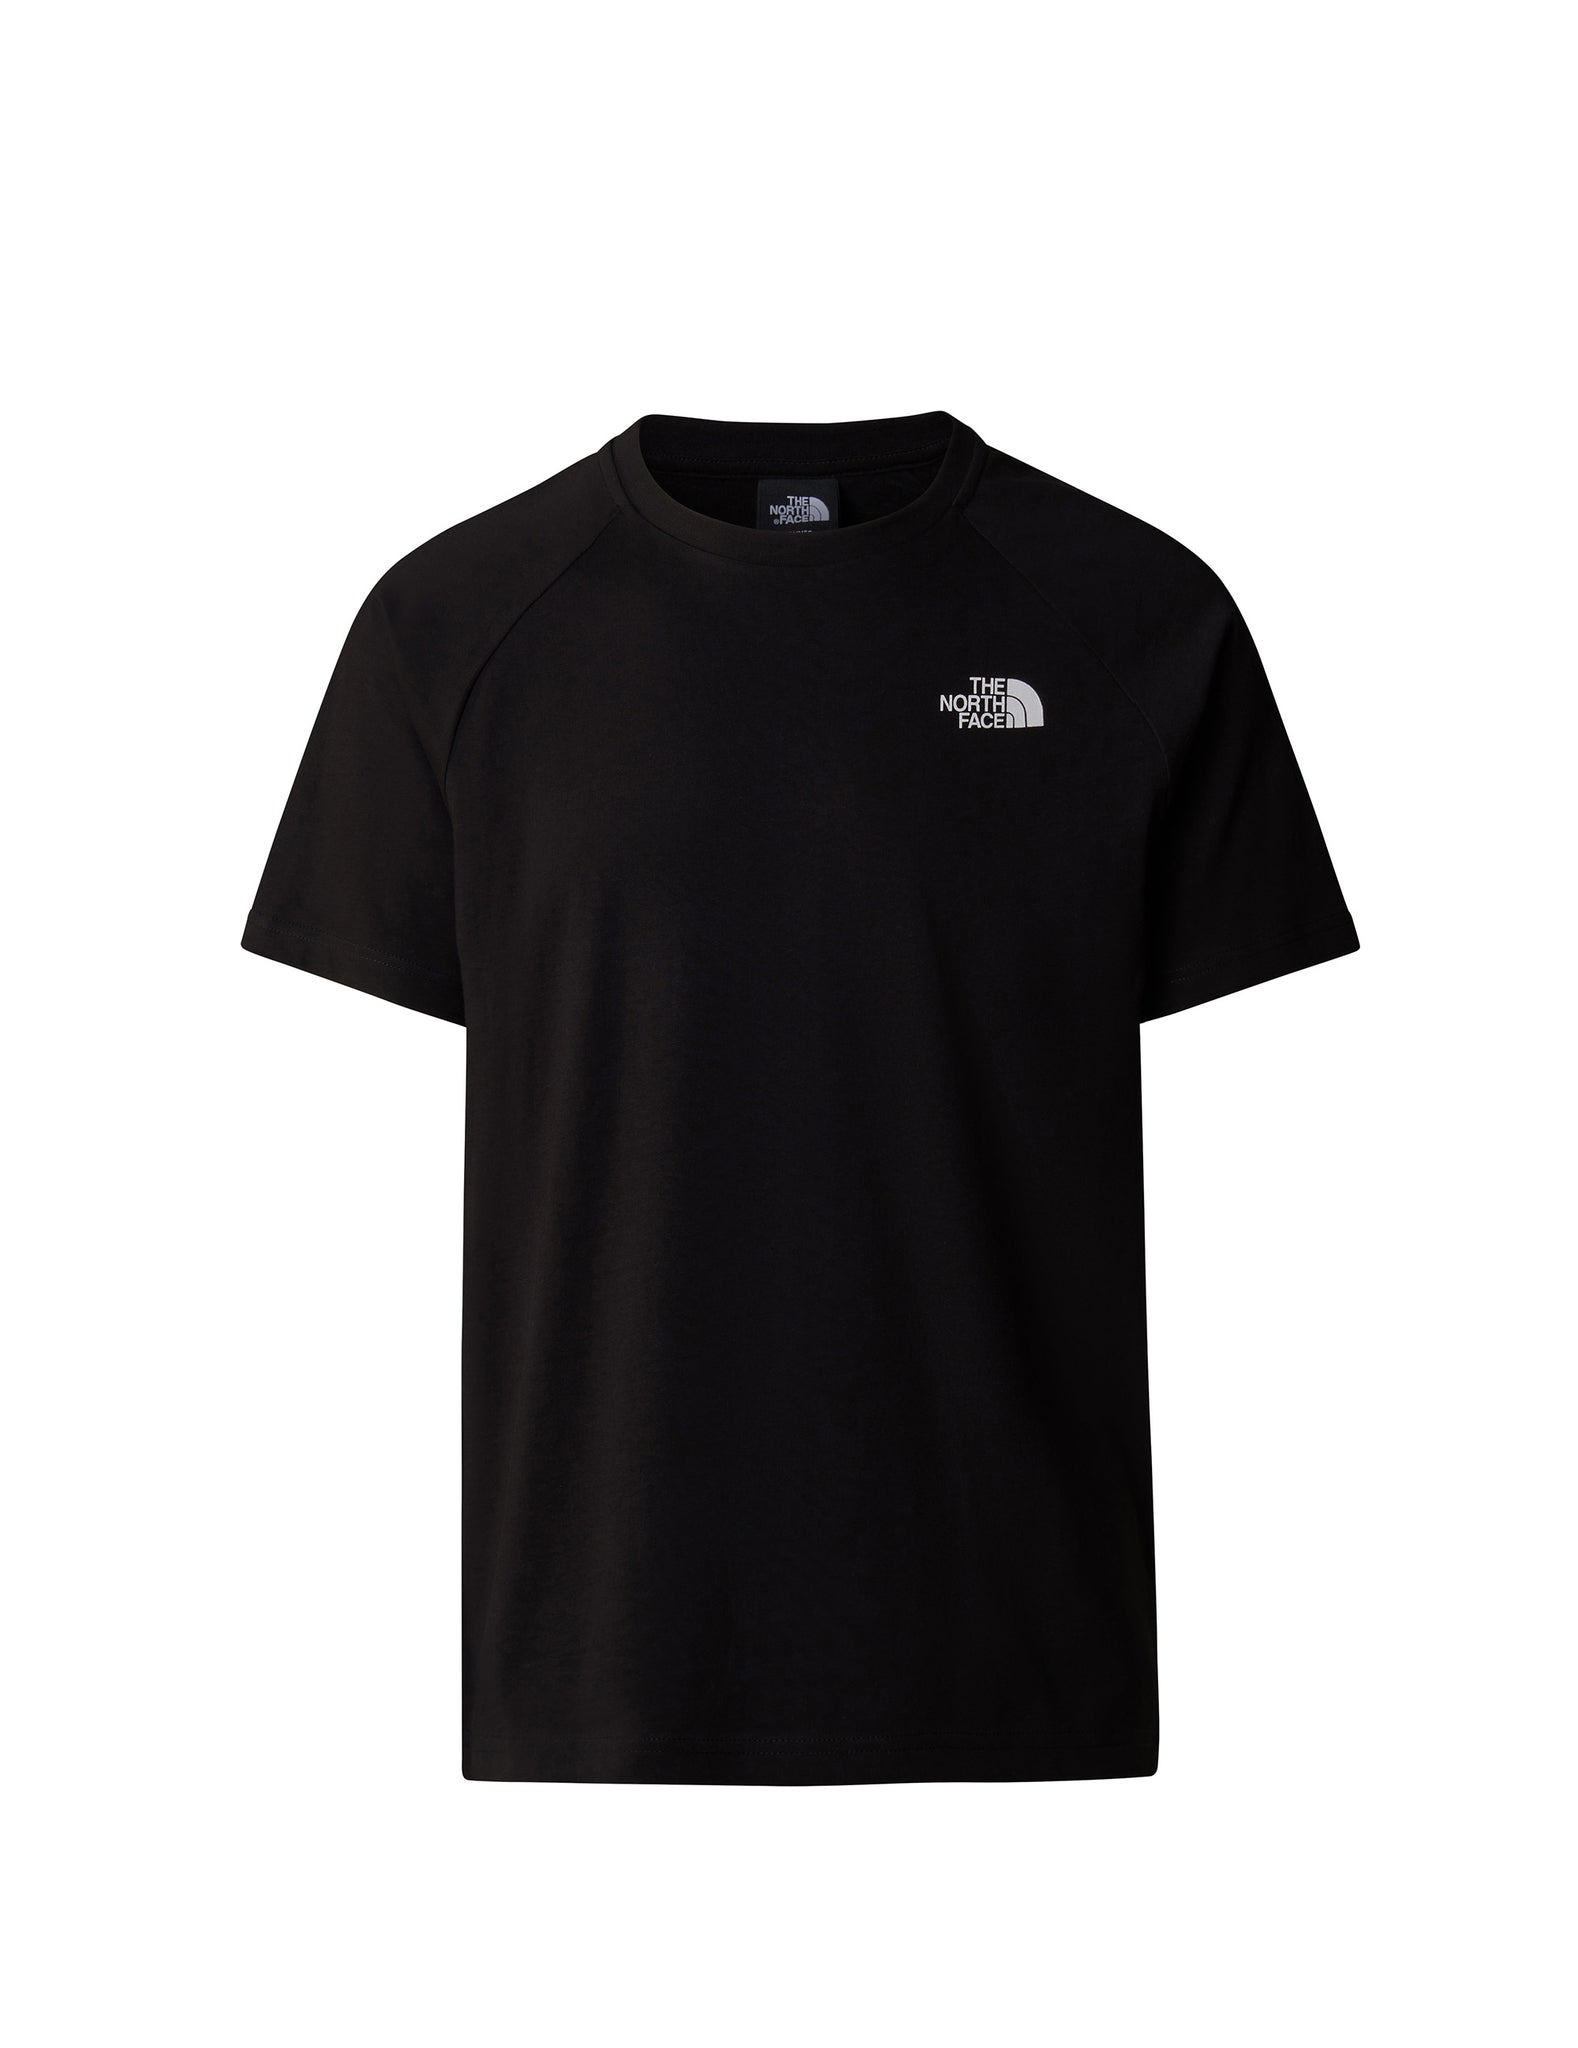 The North Face Men'S North Faces Tee Black